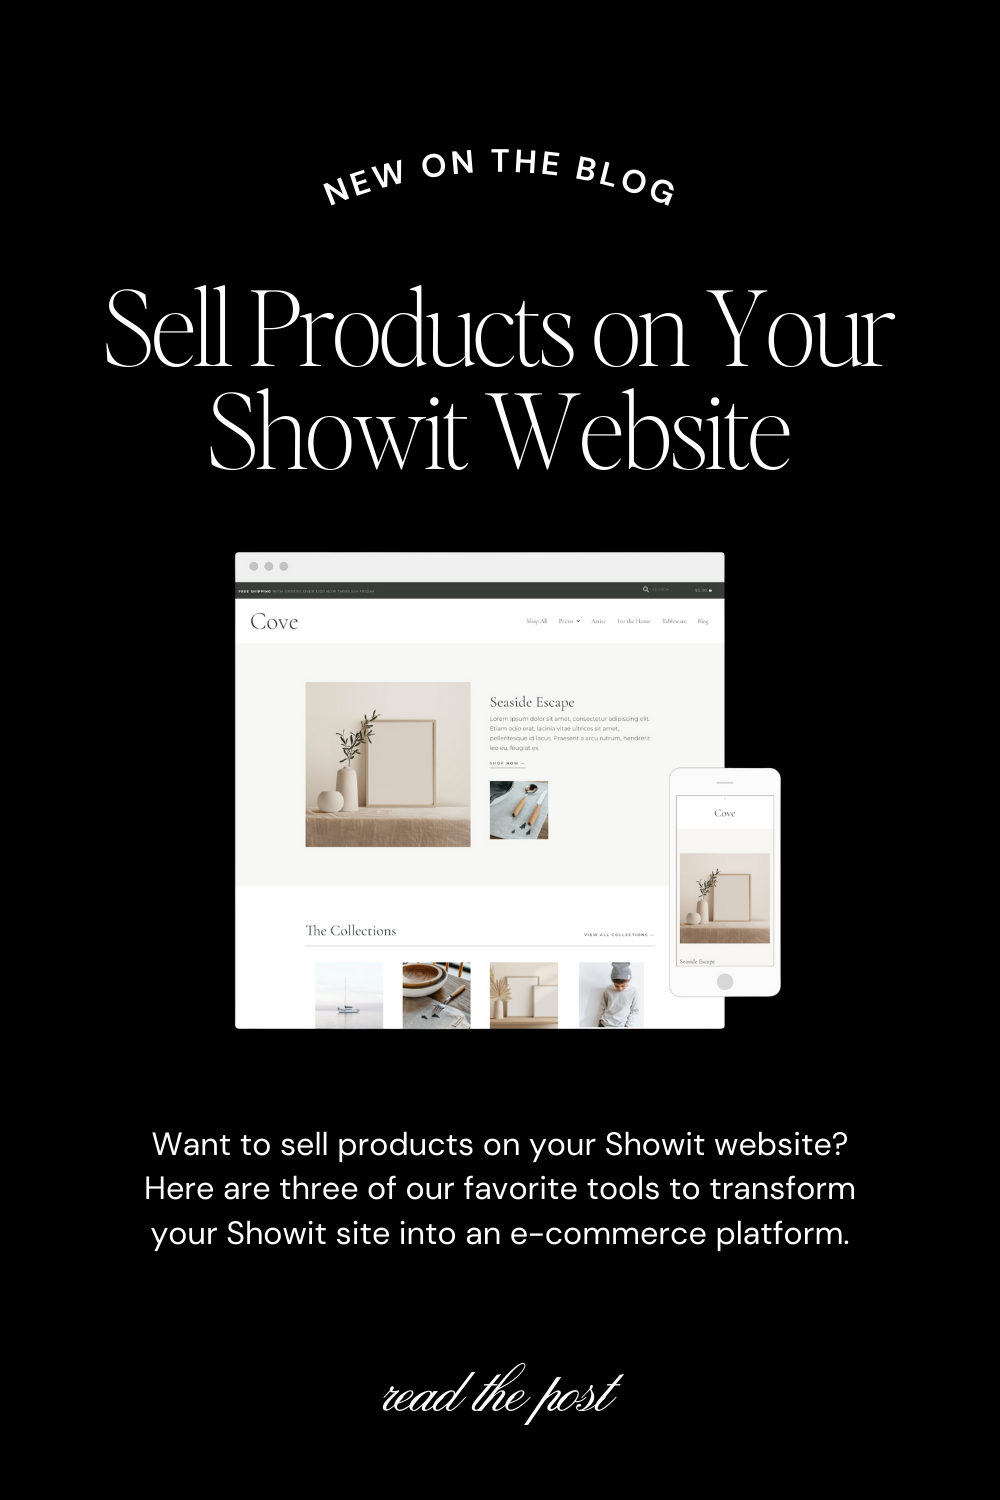 New on the Blog: Sell Products on Your Showit Website